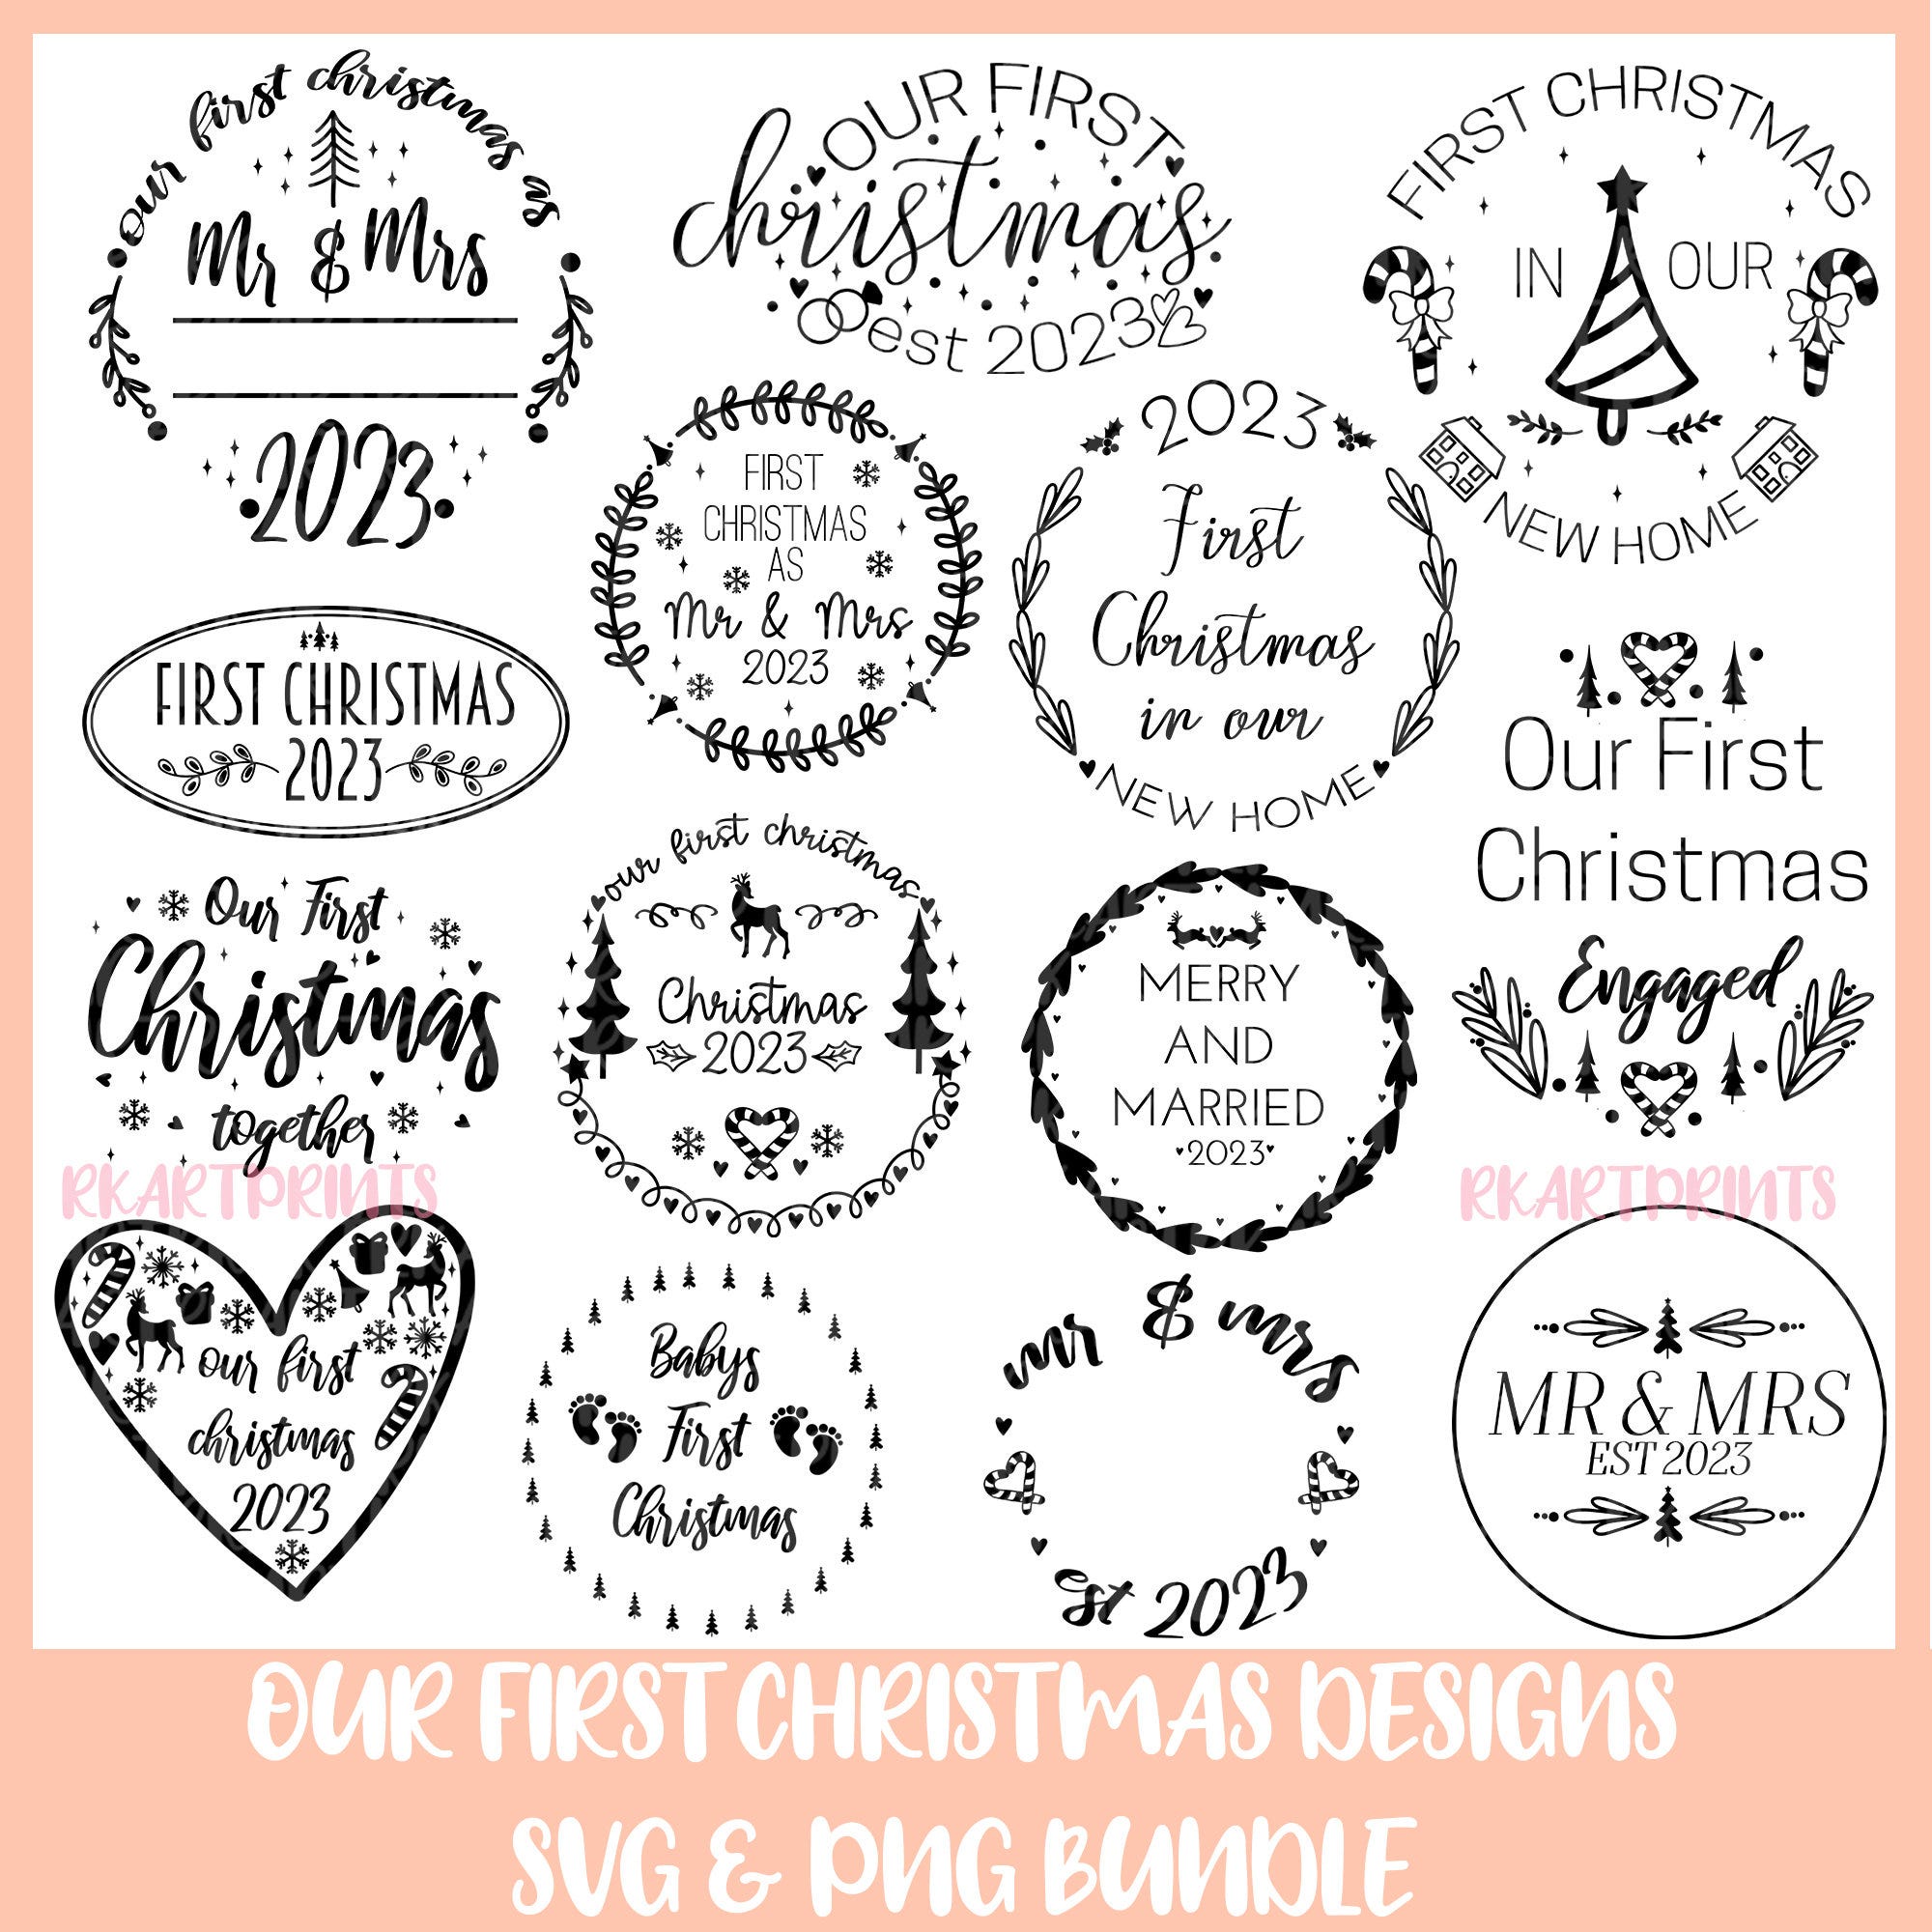 First Christmas 2023 Ornament SVG Bundle, Our first Christmas 2023 svg bundle, Ornament Svg Bundle, Christmas Ornament svg, Newlywed svg png